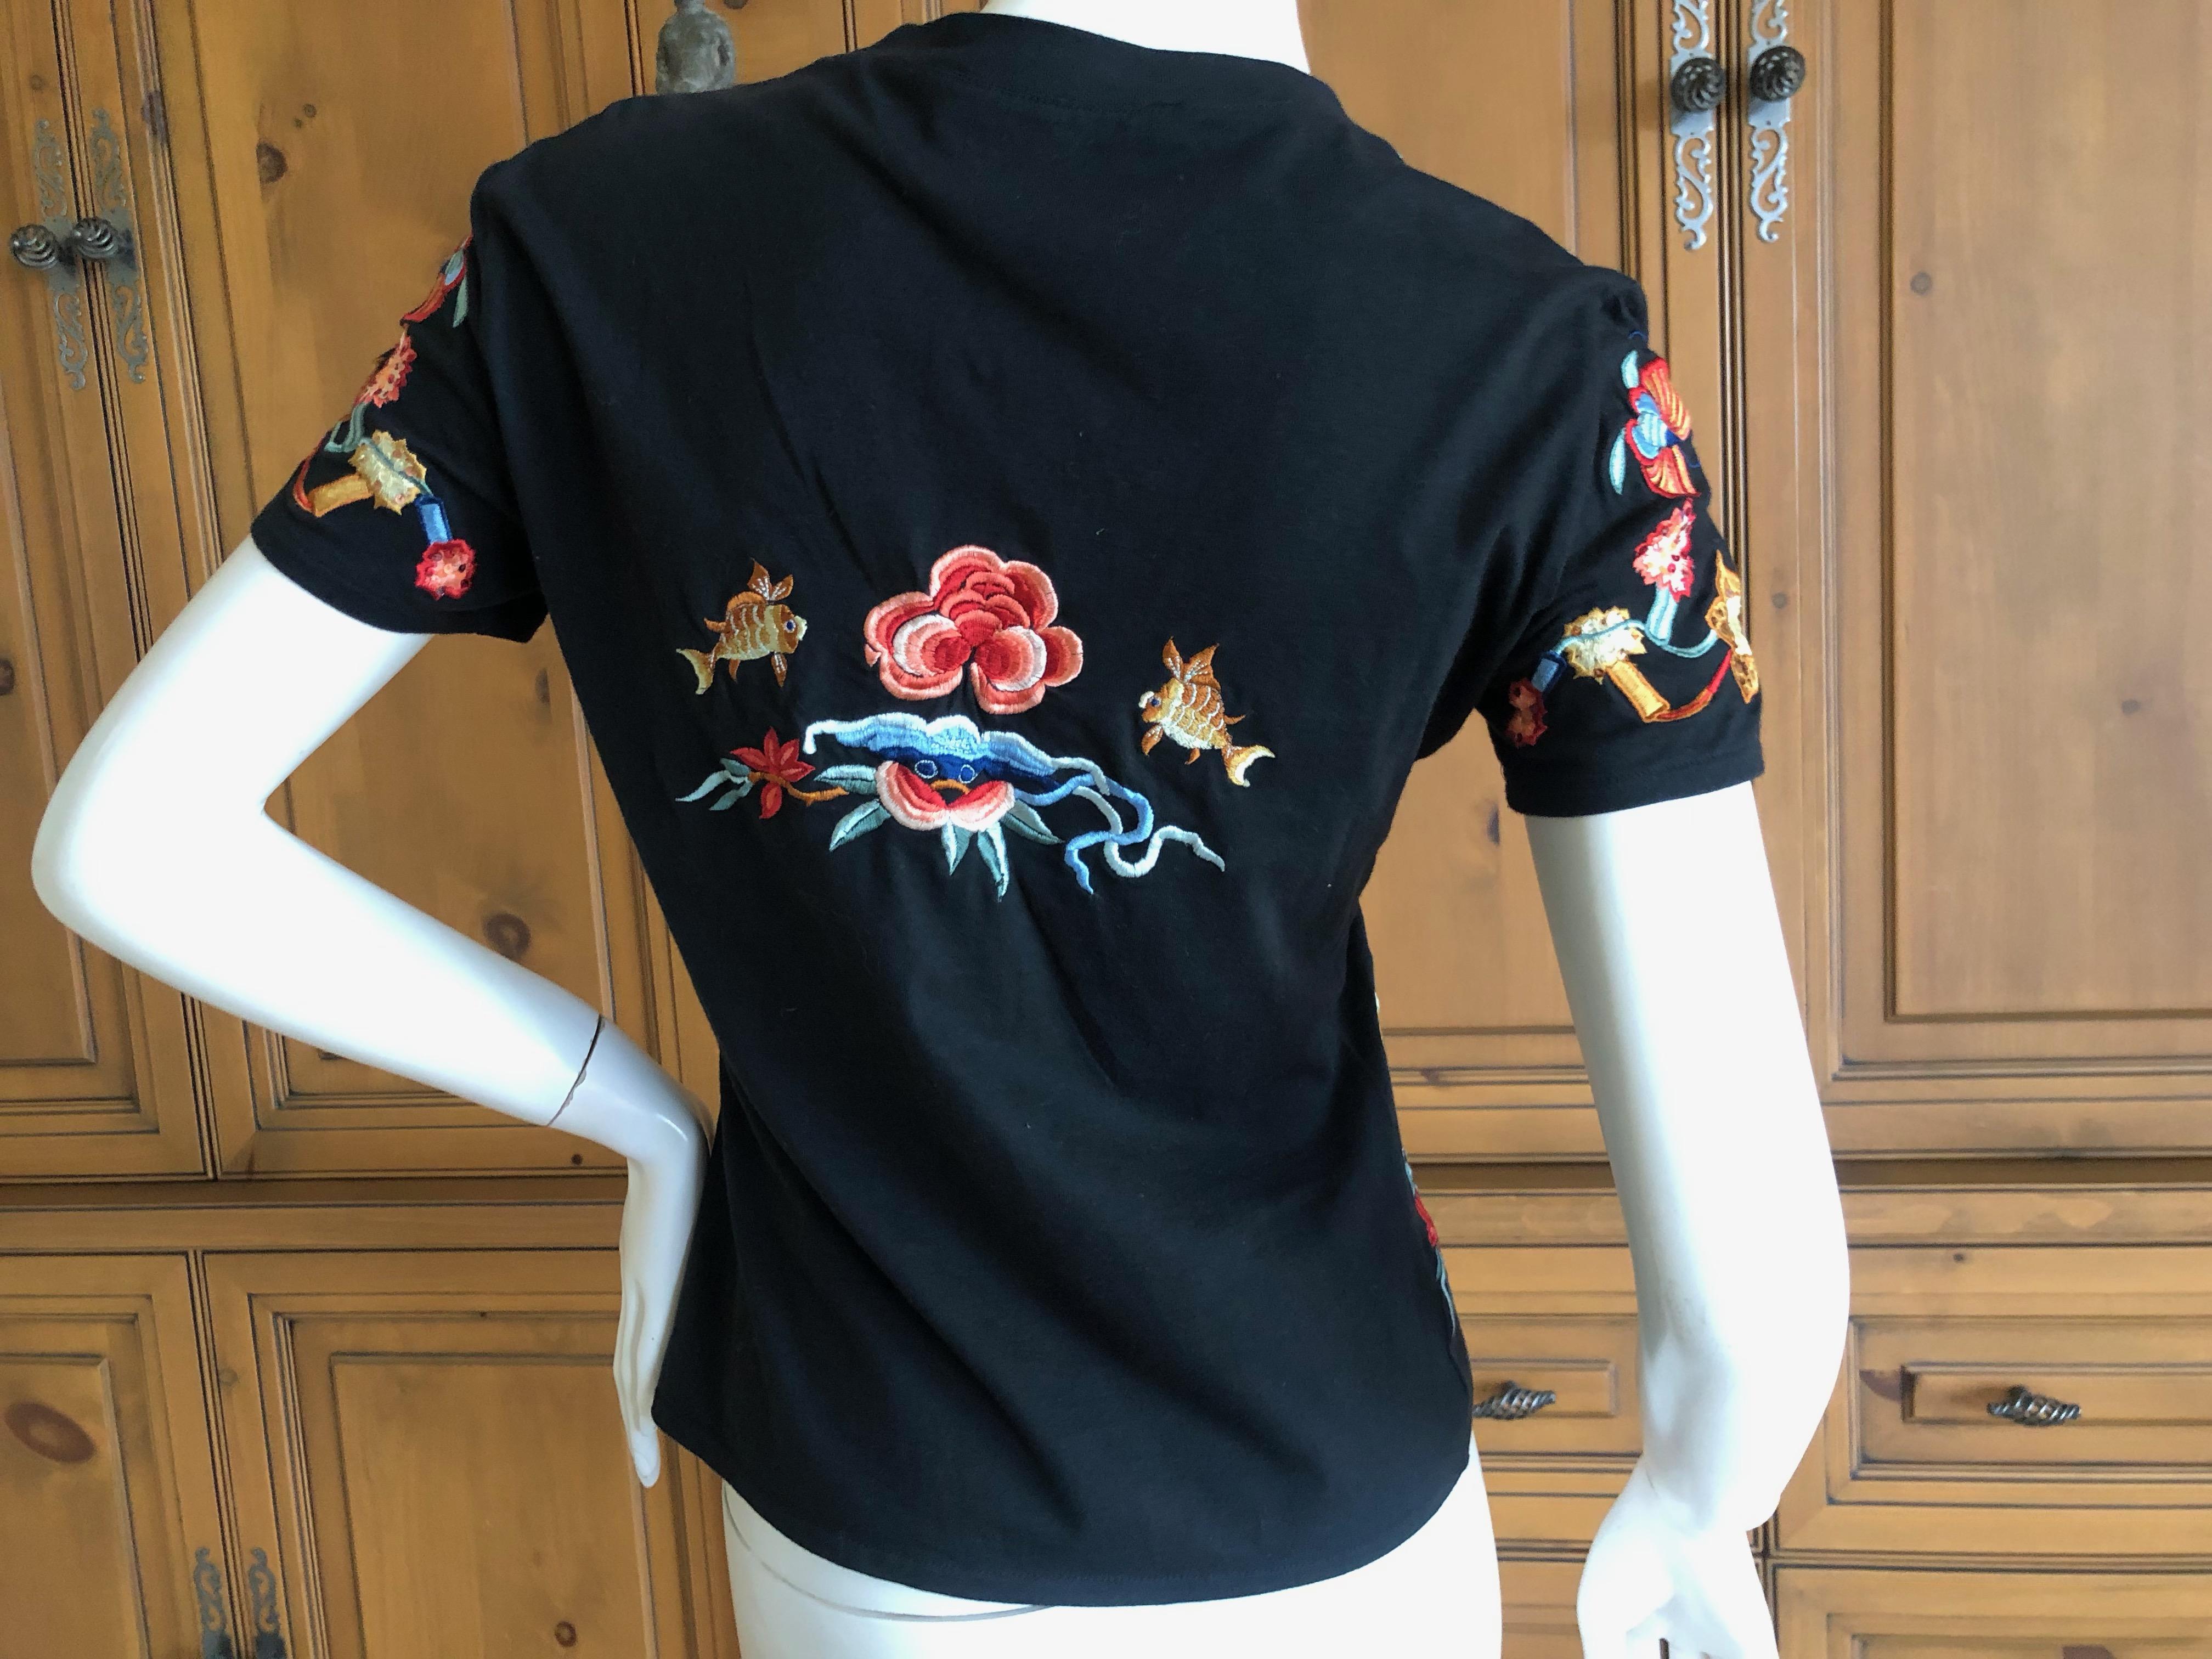 Women's Christian Dior by John Galliano Classic  J'adore Dior Embroidered Tee Shirt